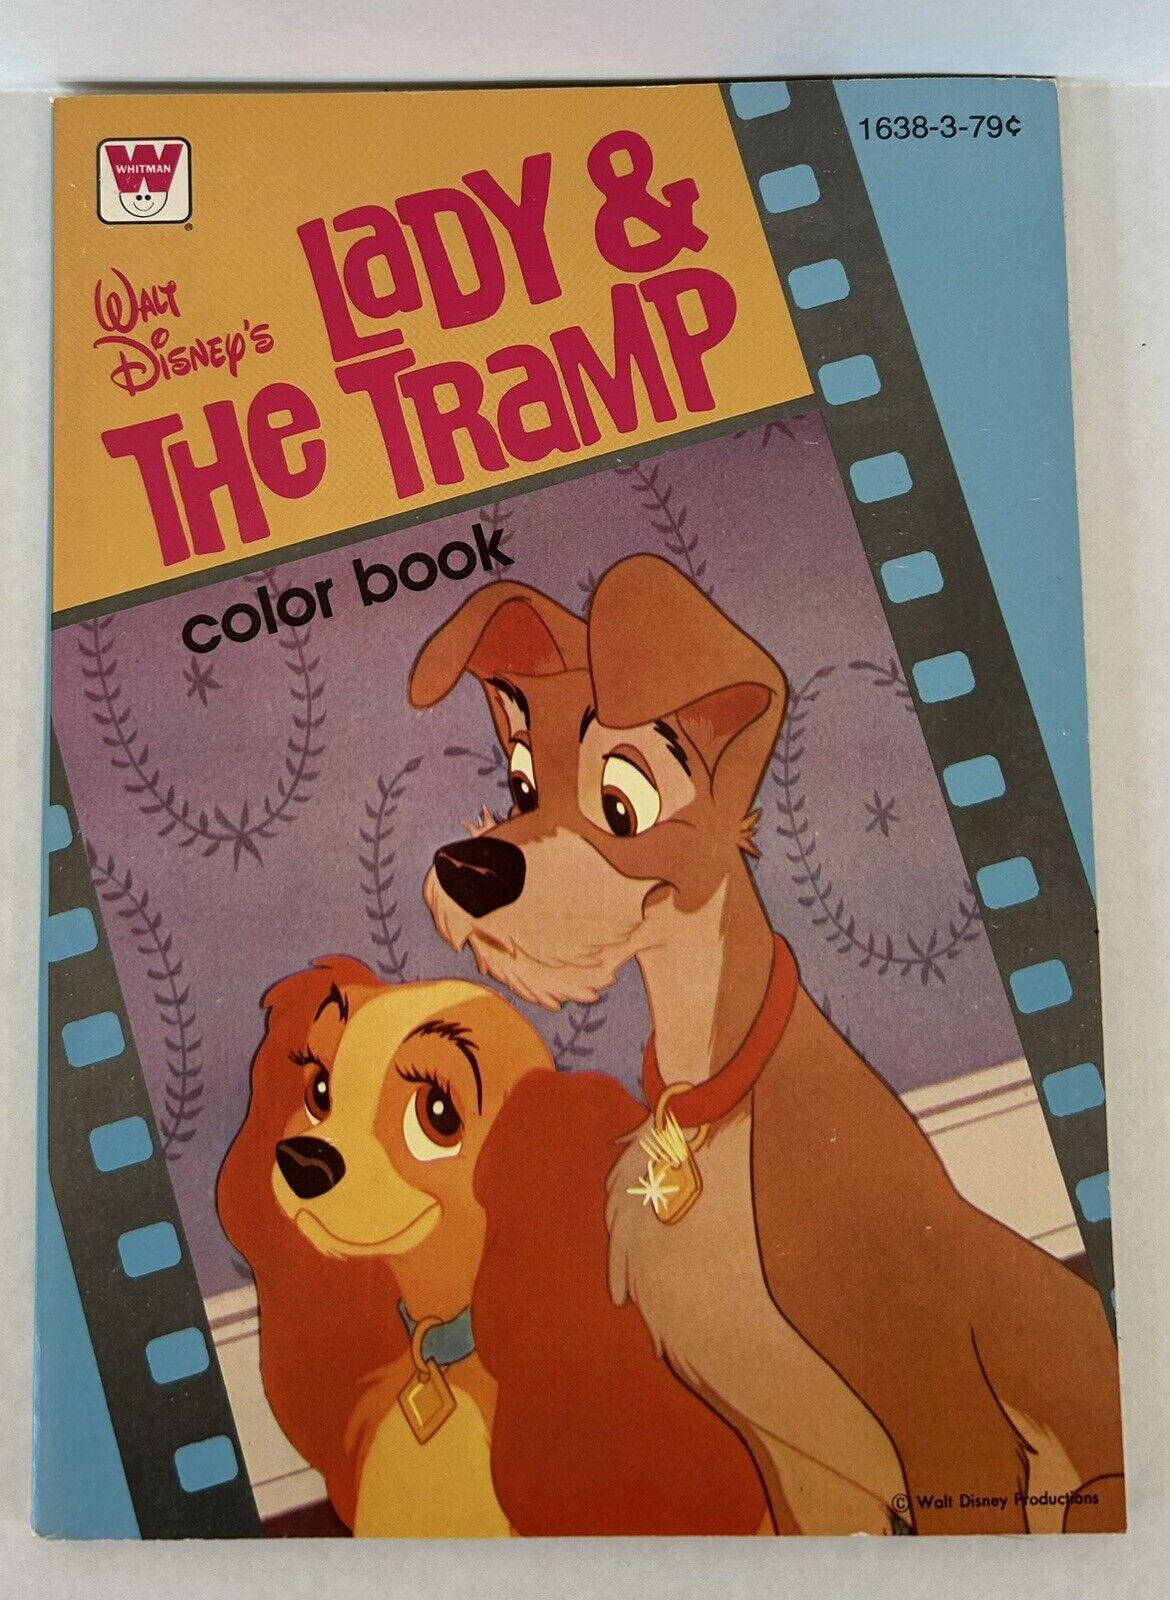 Vintage Disney's Lady & The Tramp Coloring Book 1979 Whitman Books New Unused